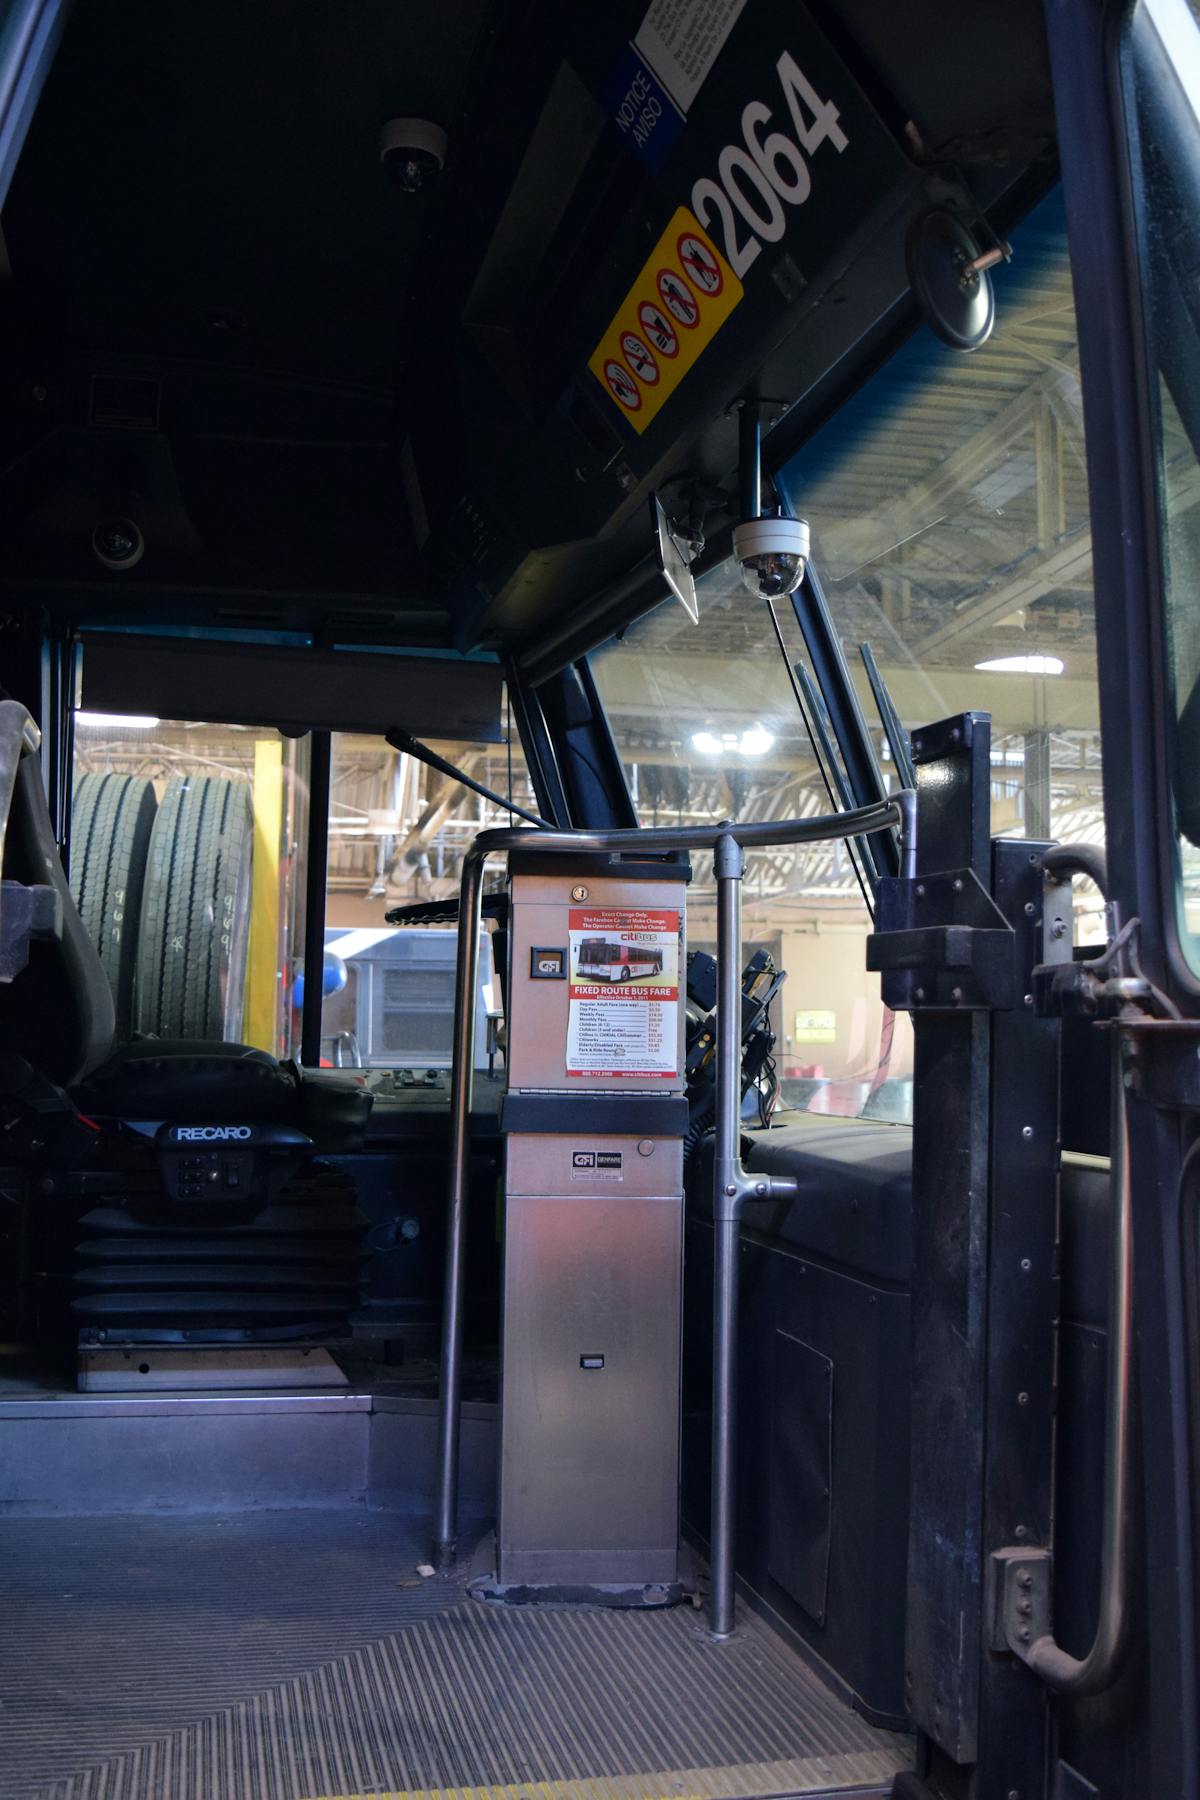 Citibus has installed cameras on all fixed-route buses, including six inside the vehicle.